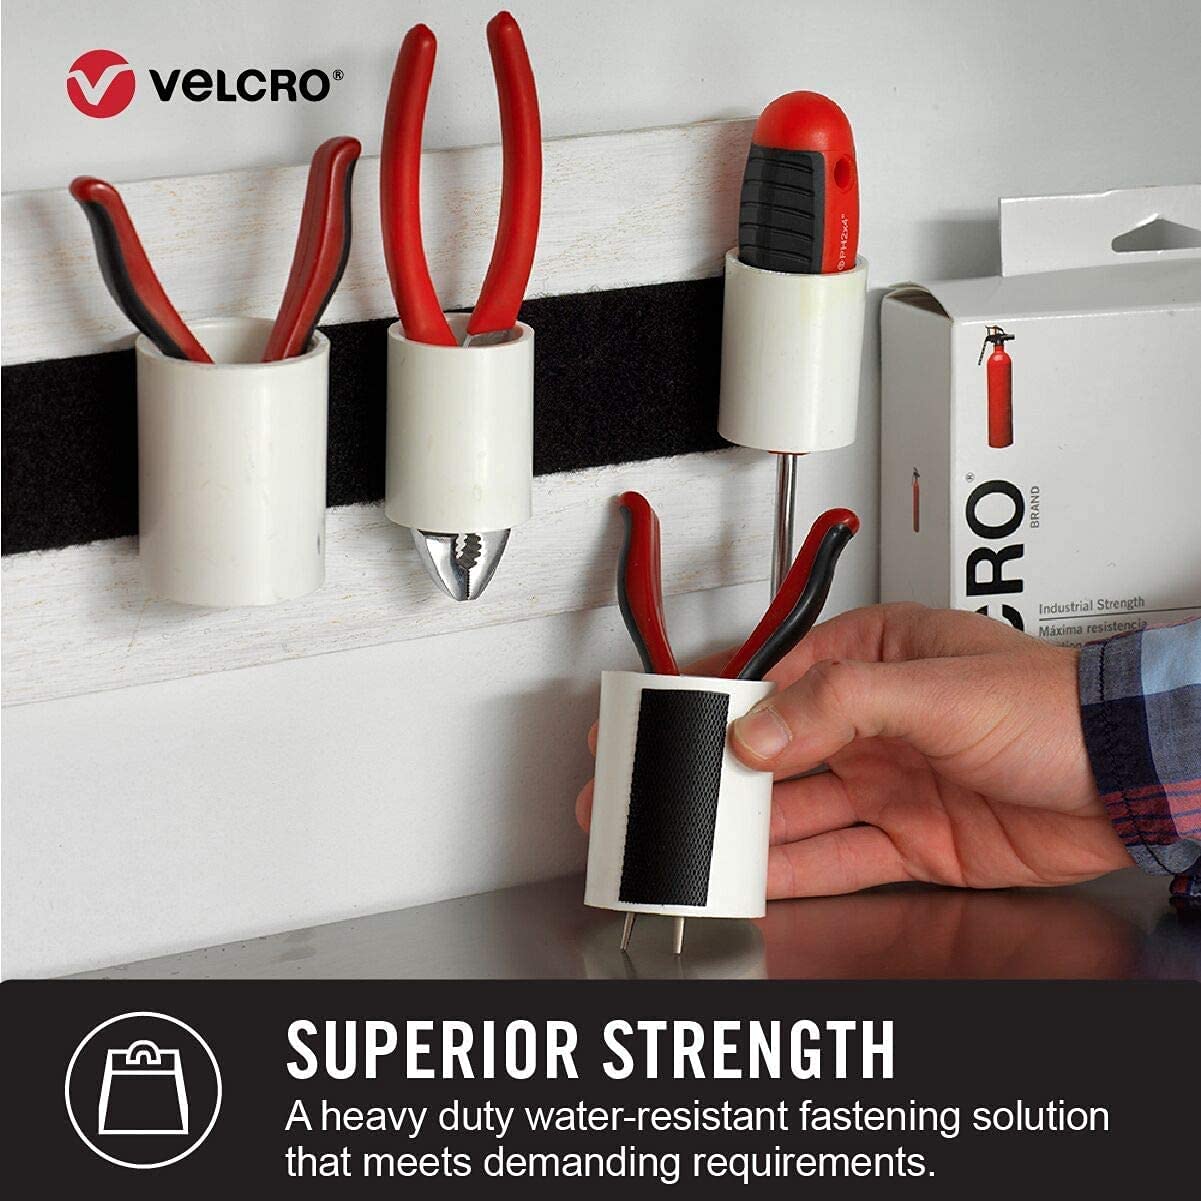 VELCRO Brand Industrial Strength, Indoor & Outdoor Use, Superior Holding Power on Smooth Surfaces 10ft x 2in Roll, Black - image 3 of 7